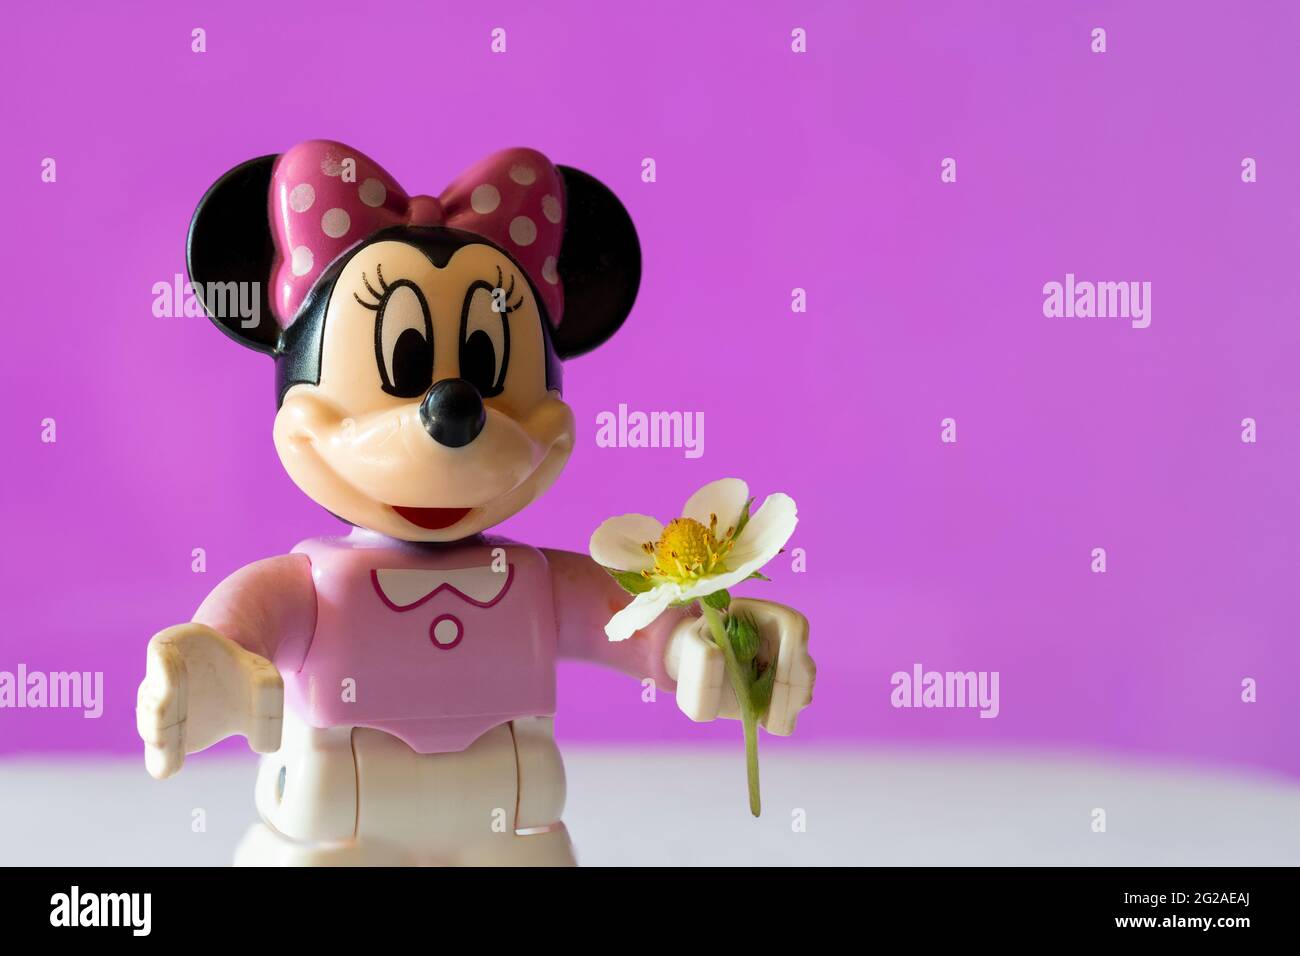 New York, USA - May 25, 2021: A close up shot of a miniature famous Disney character Minnie Mouse Disney character holding a flower against a pink bac Stock Photo